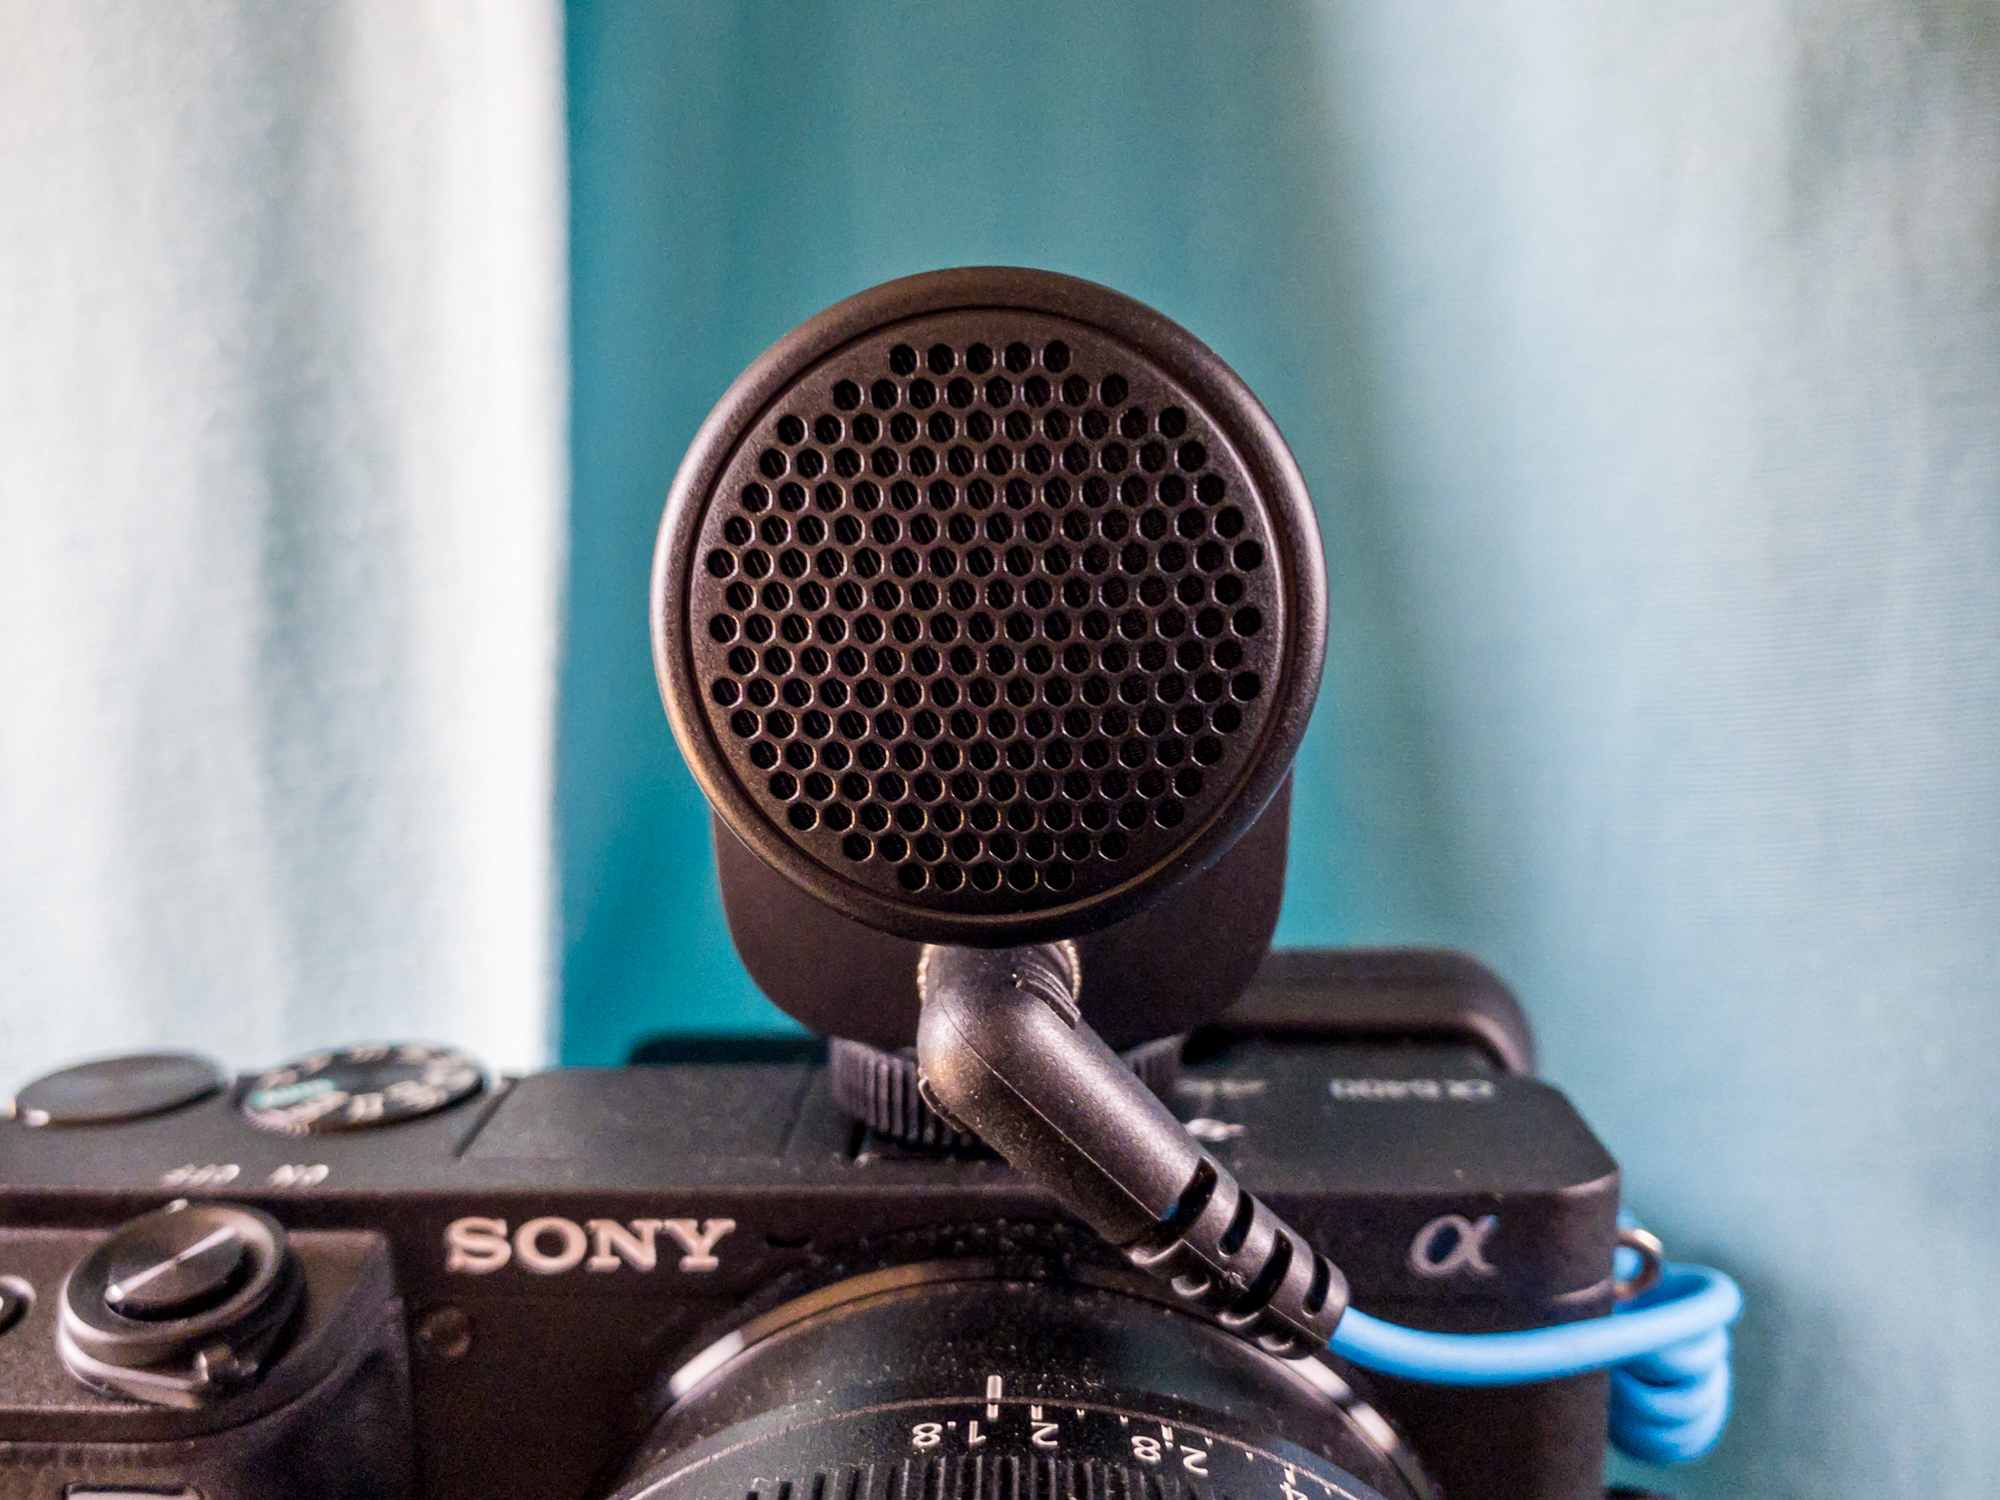 Sennheiser S Mke 200 On Camera Microphone Is The Perfect Home Videoconferencing Upgrade Techcrunch